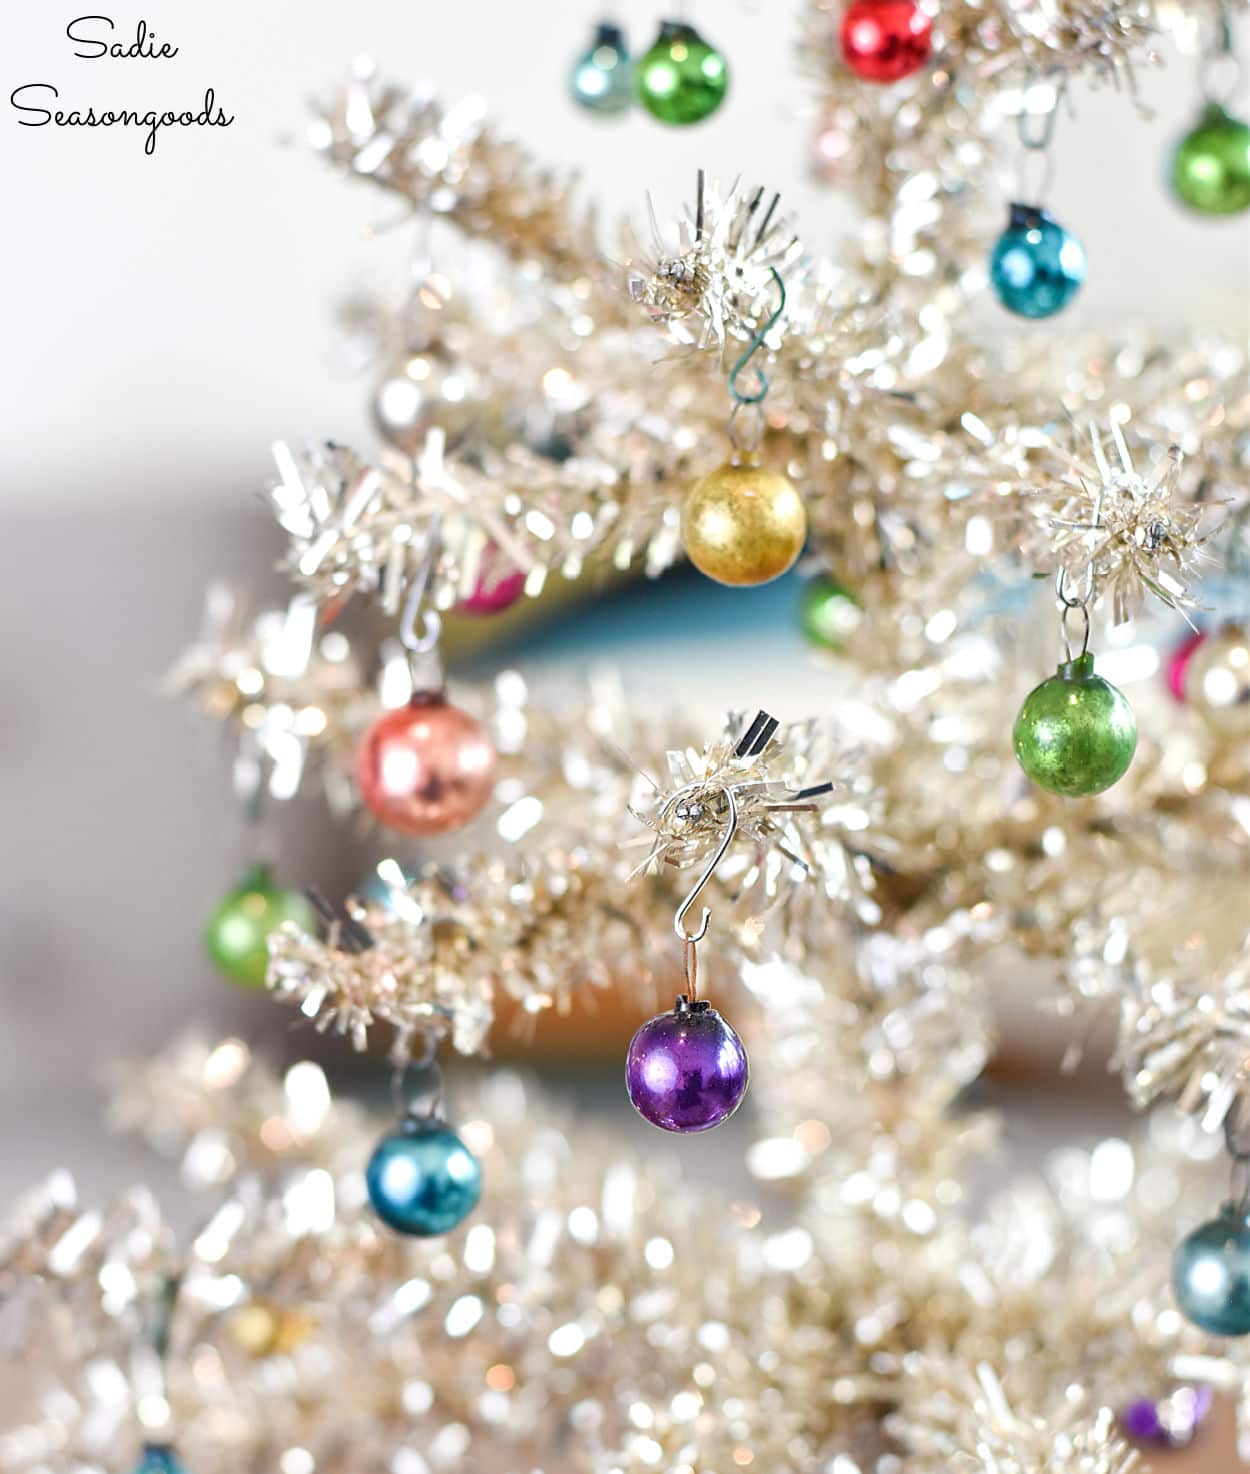 How to Make Christmas Ornament Hooks for Your Mini Ornaments